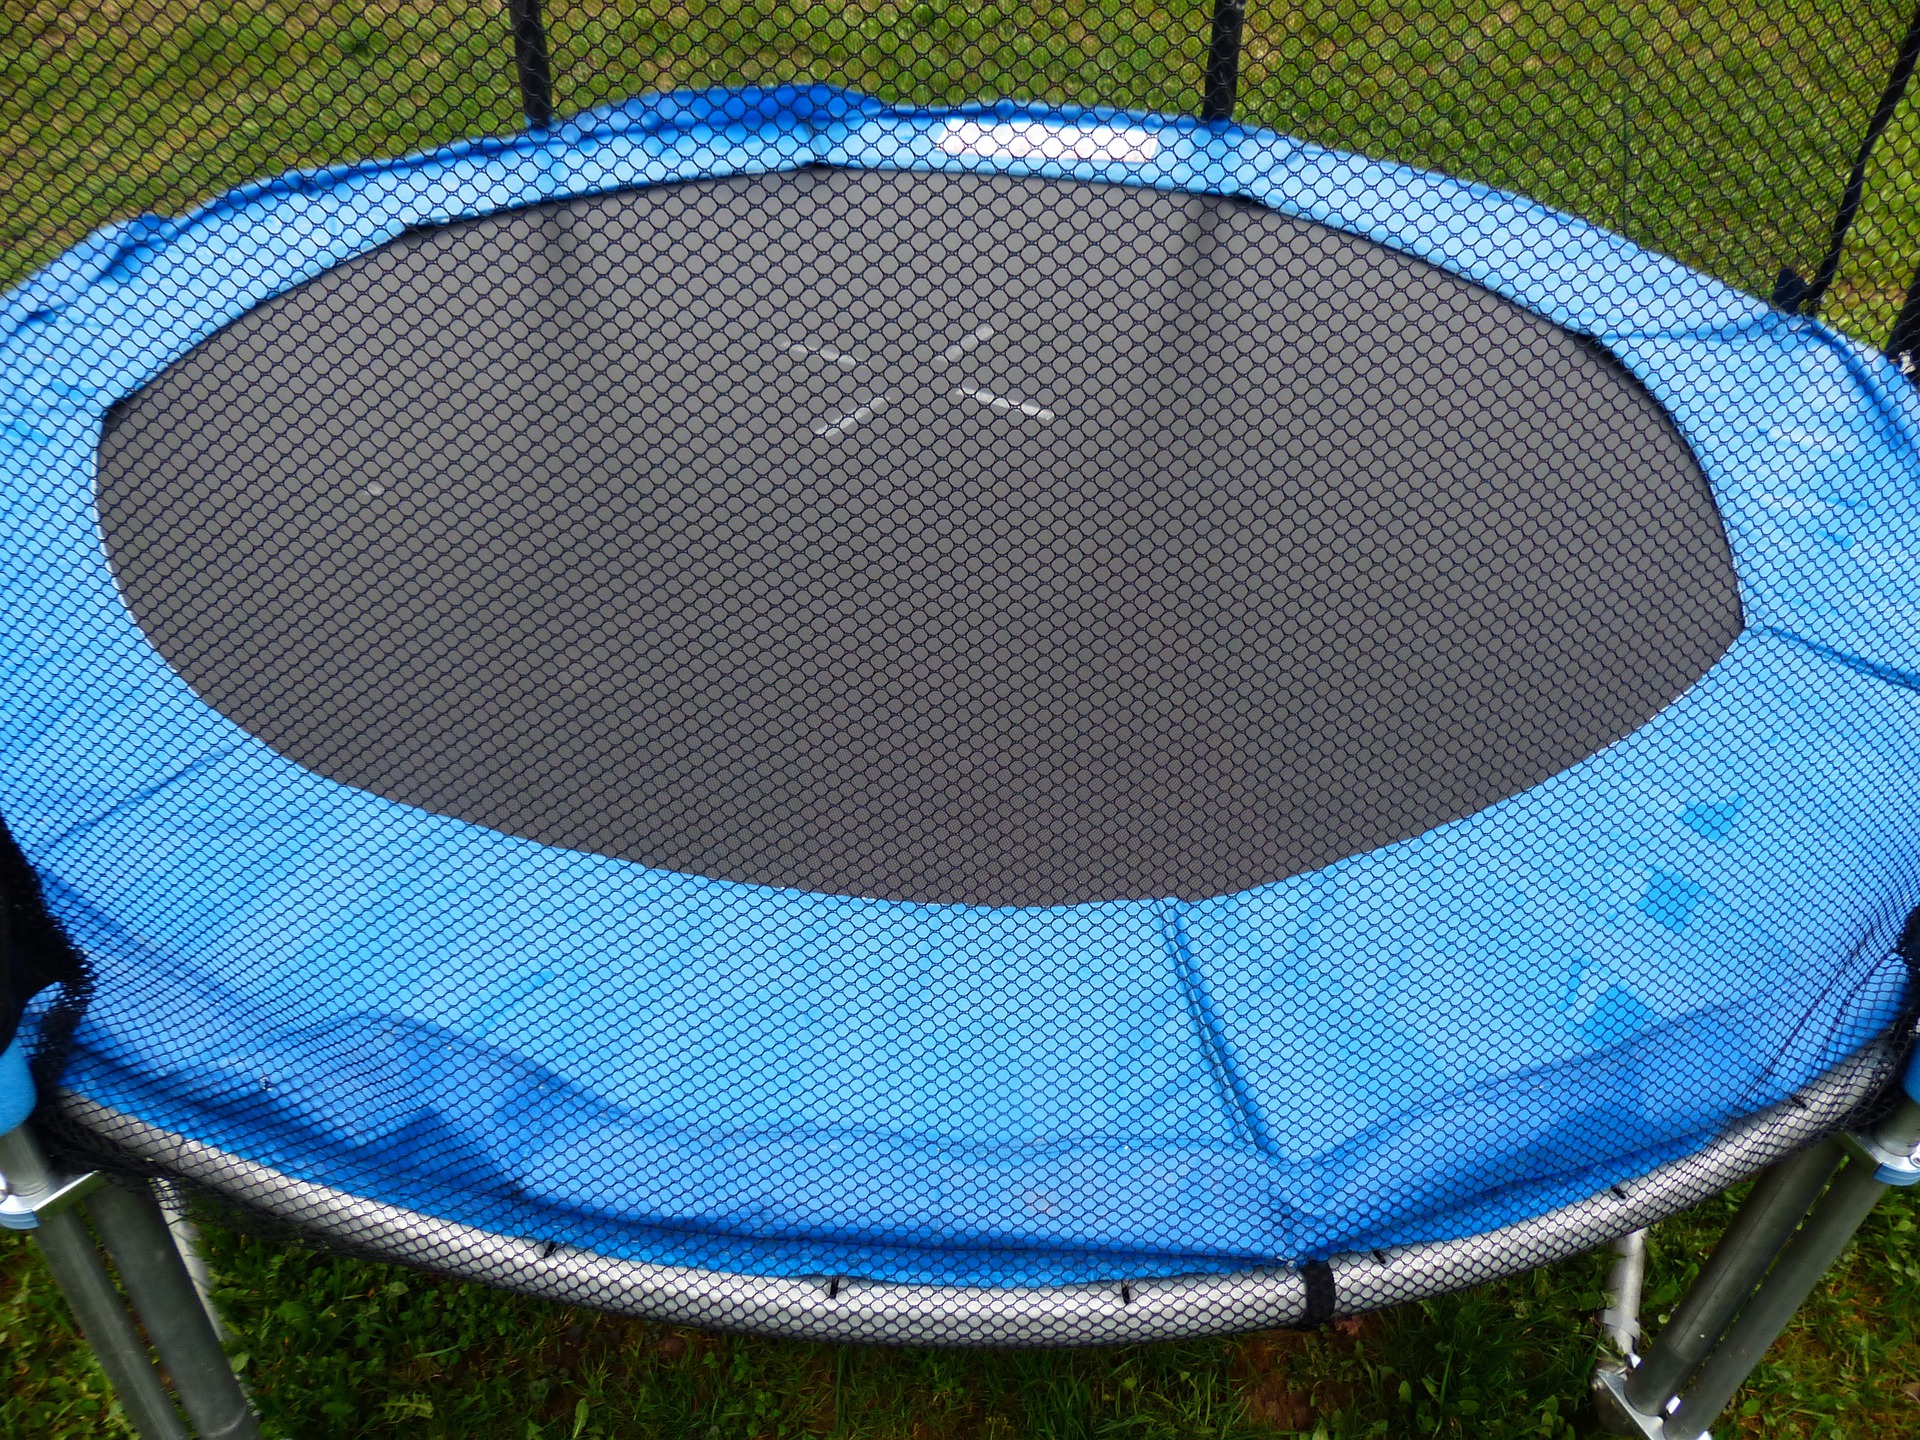 Discover The Best Trampoline For Your Kids and Yourself